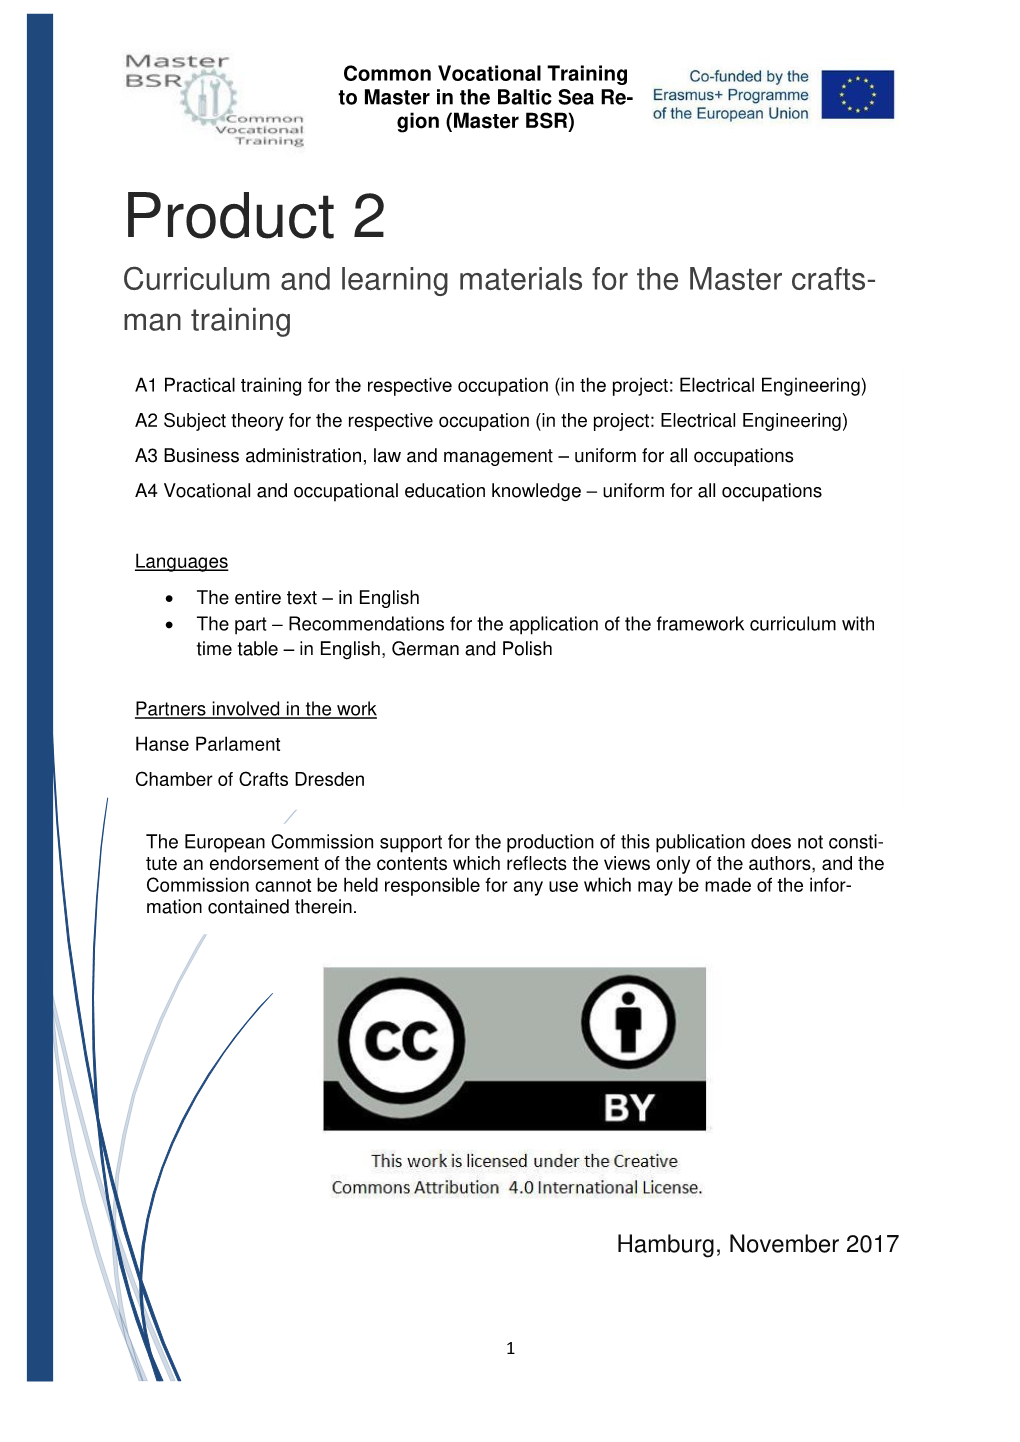 Product 2 Curriculum and Learning Materials for the Master Crafts- Man Training